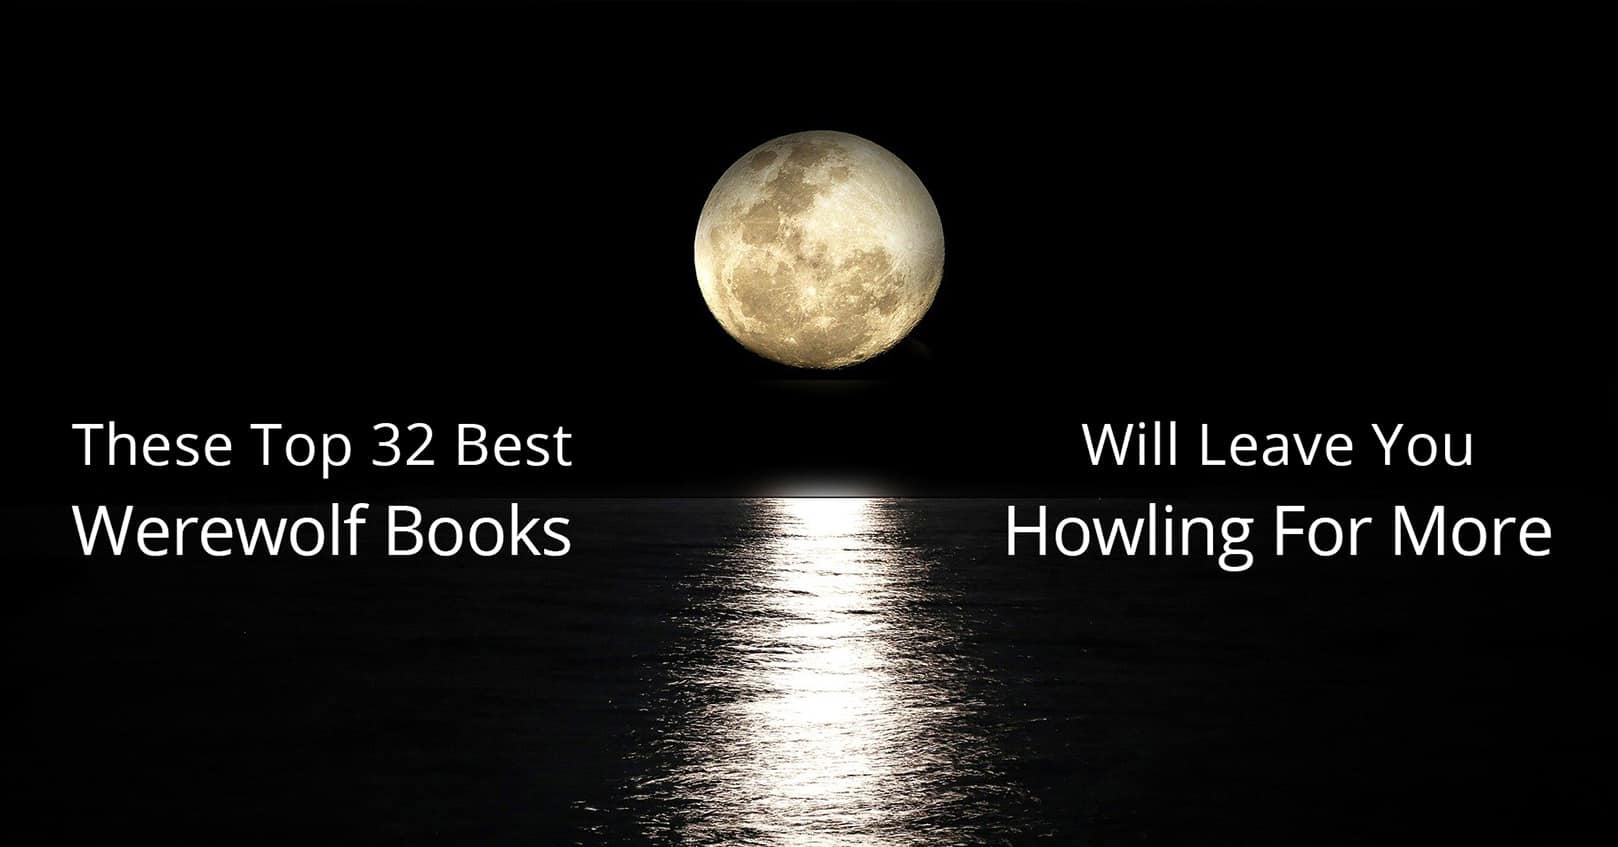 These Top 32 Werewolf Books Will Leave You Howling For More 7796